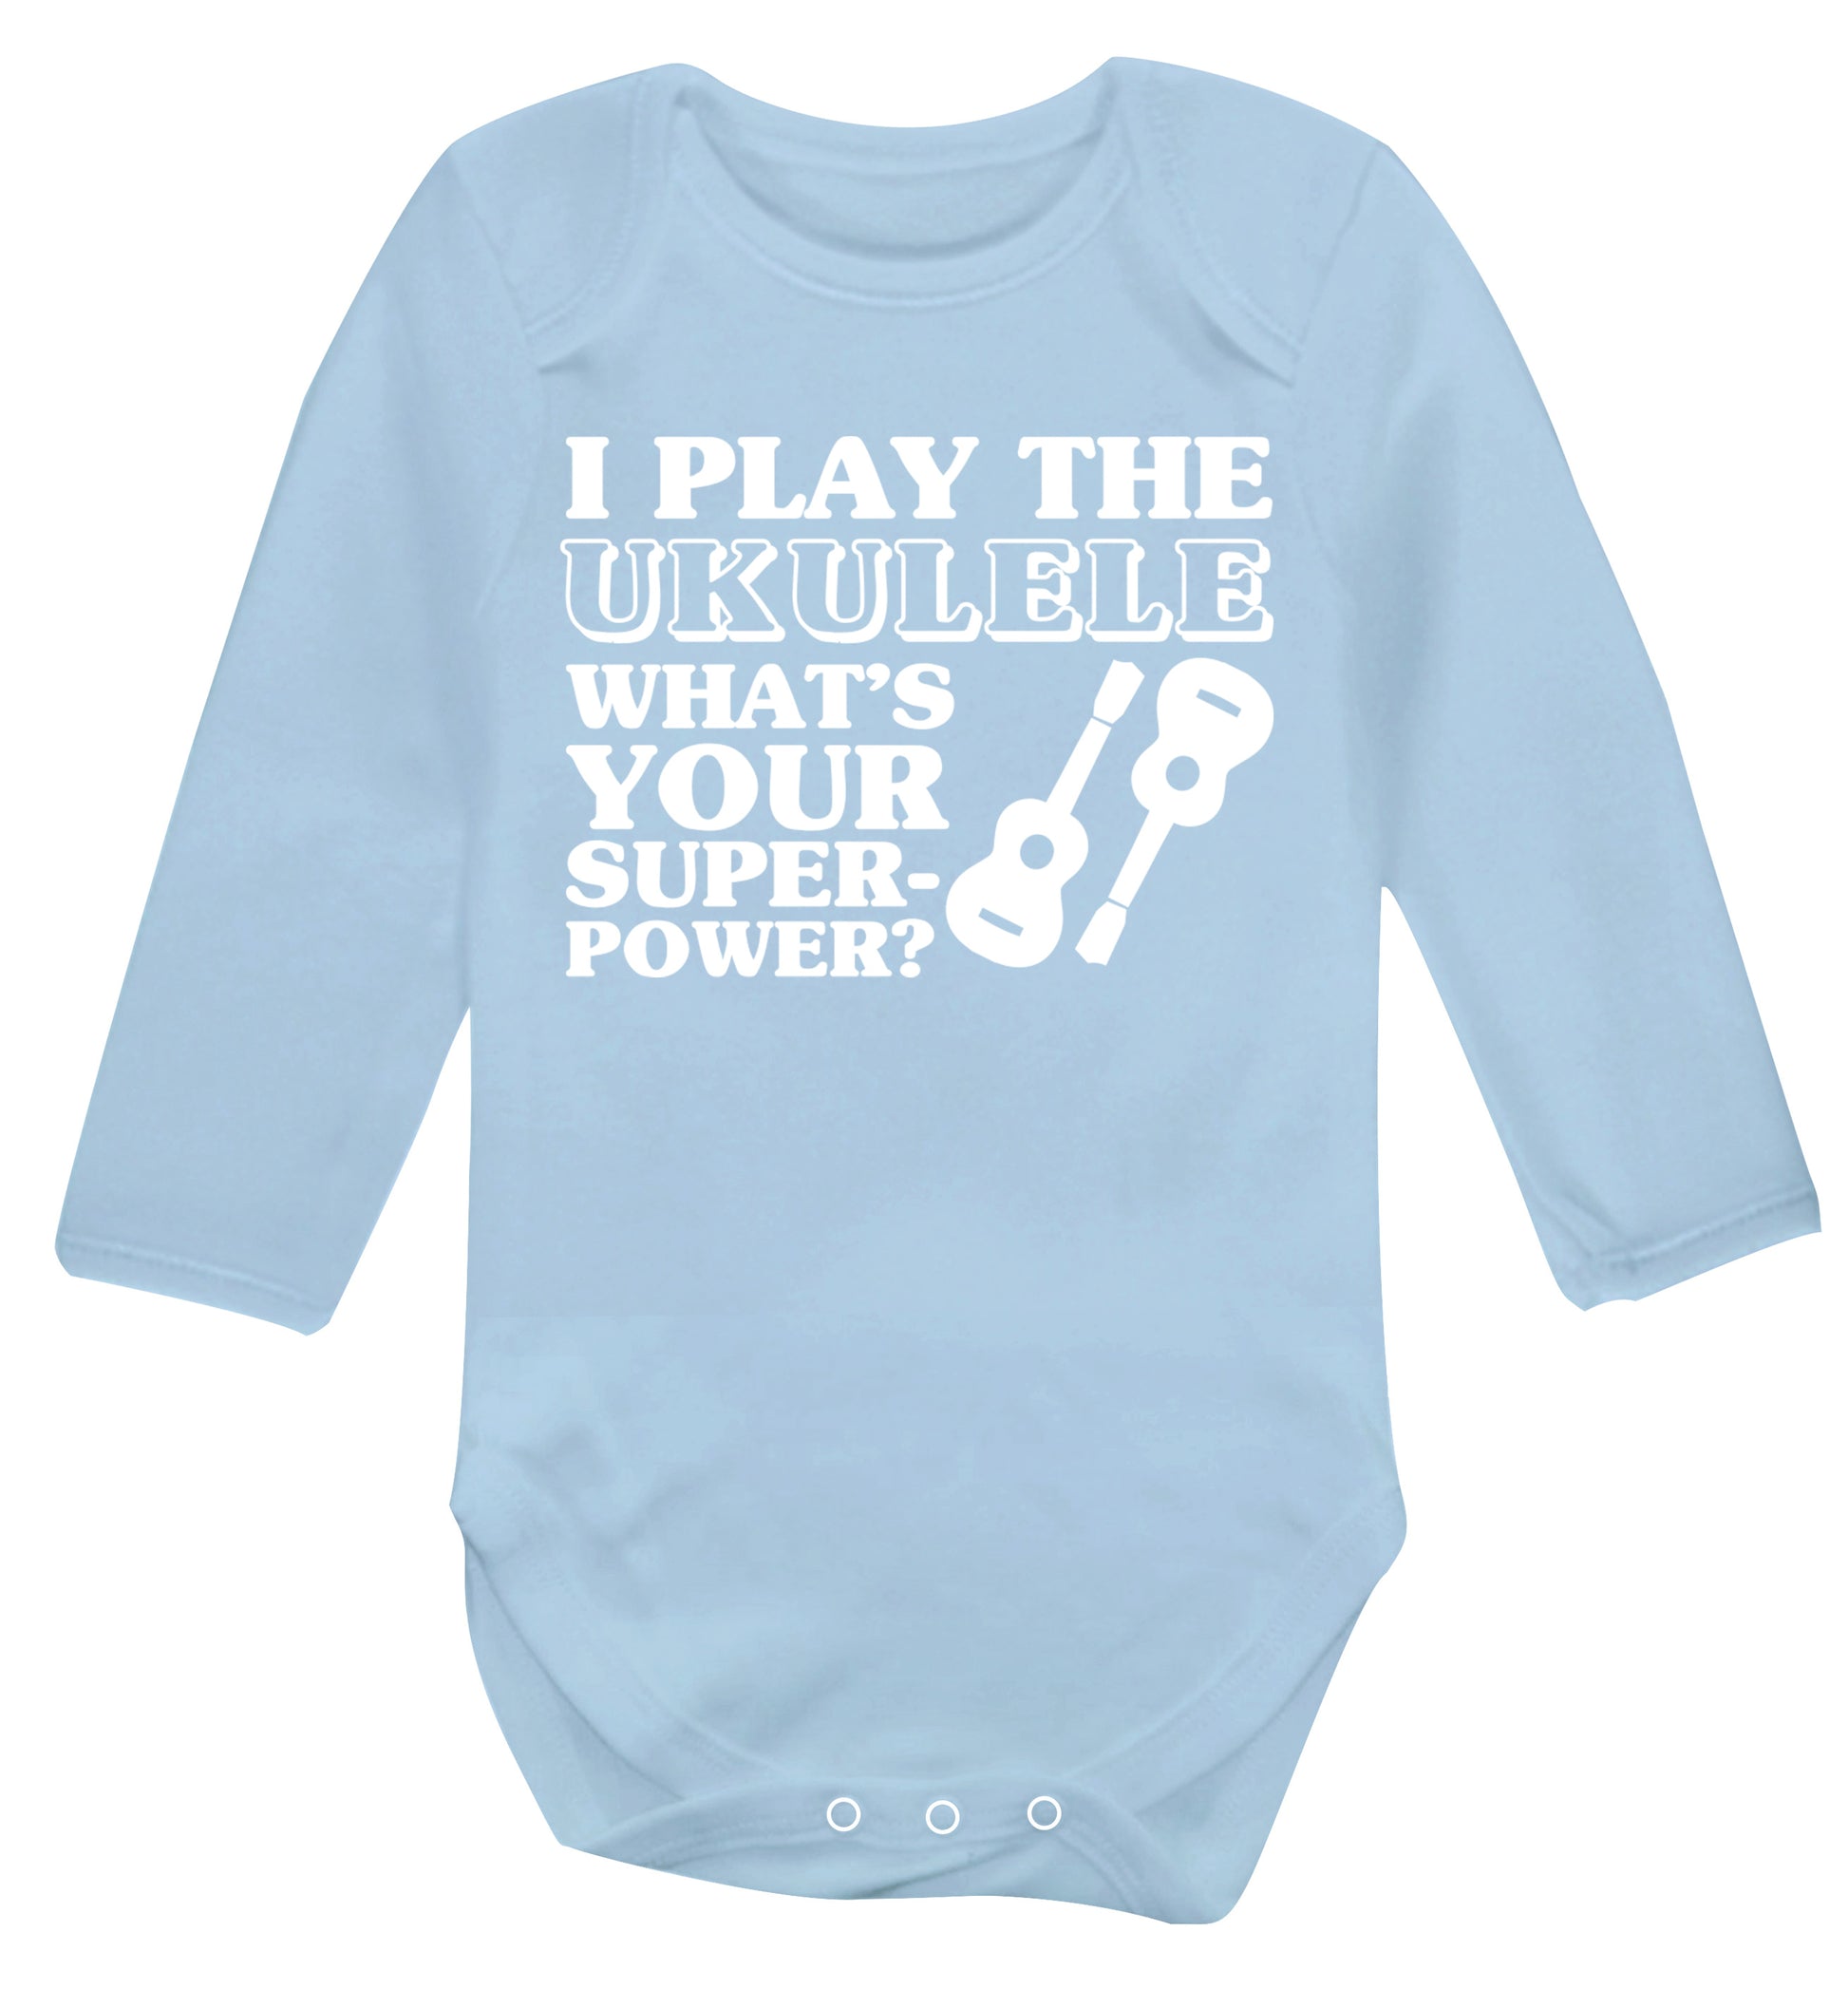 I play the ukulele what's your superpower? Baby Vest long sleeved pale blue 6-12 months